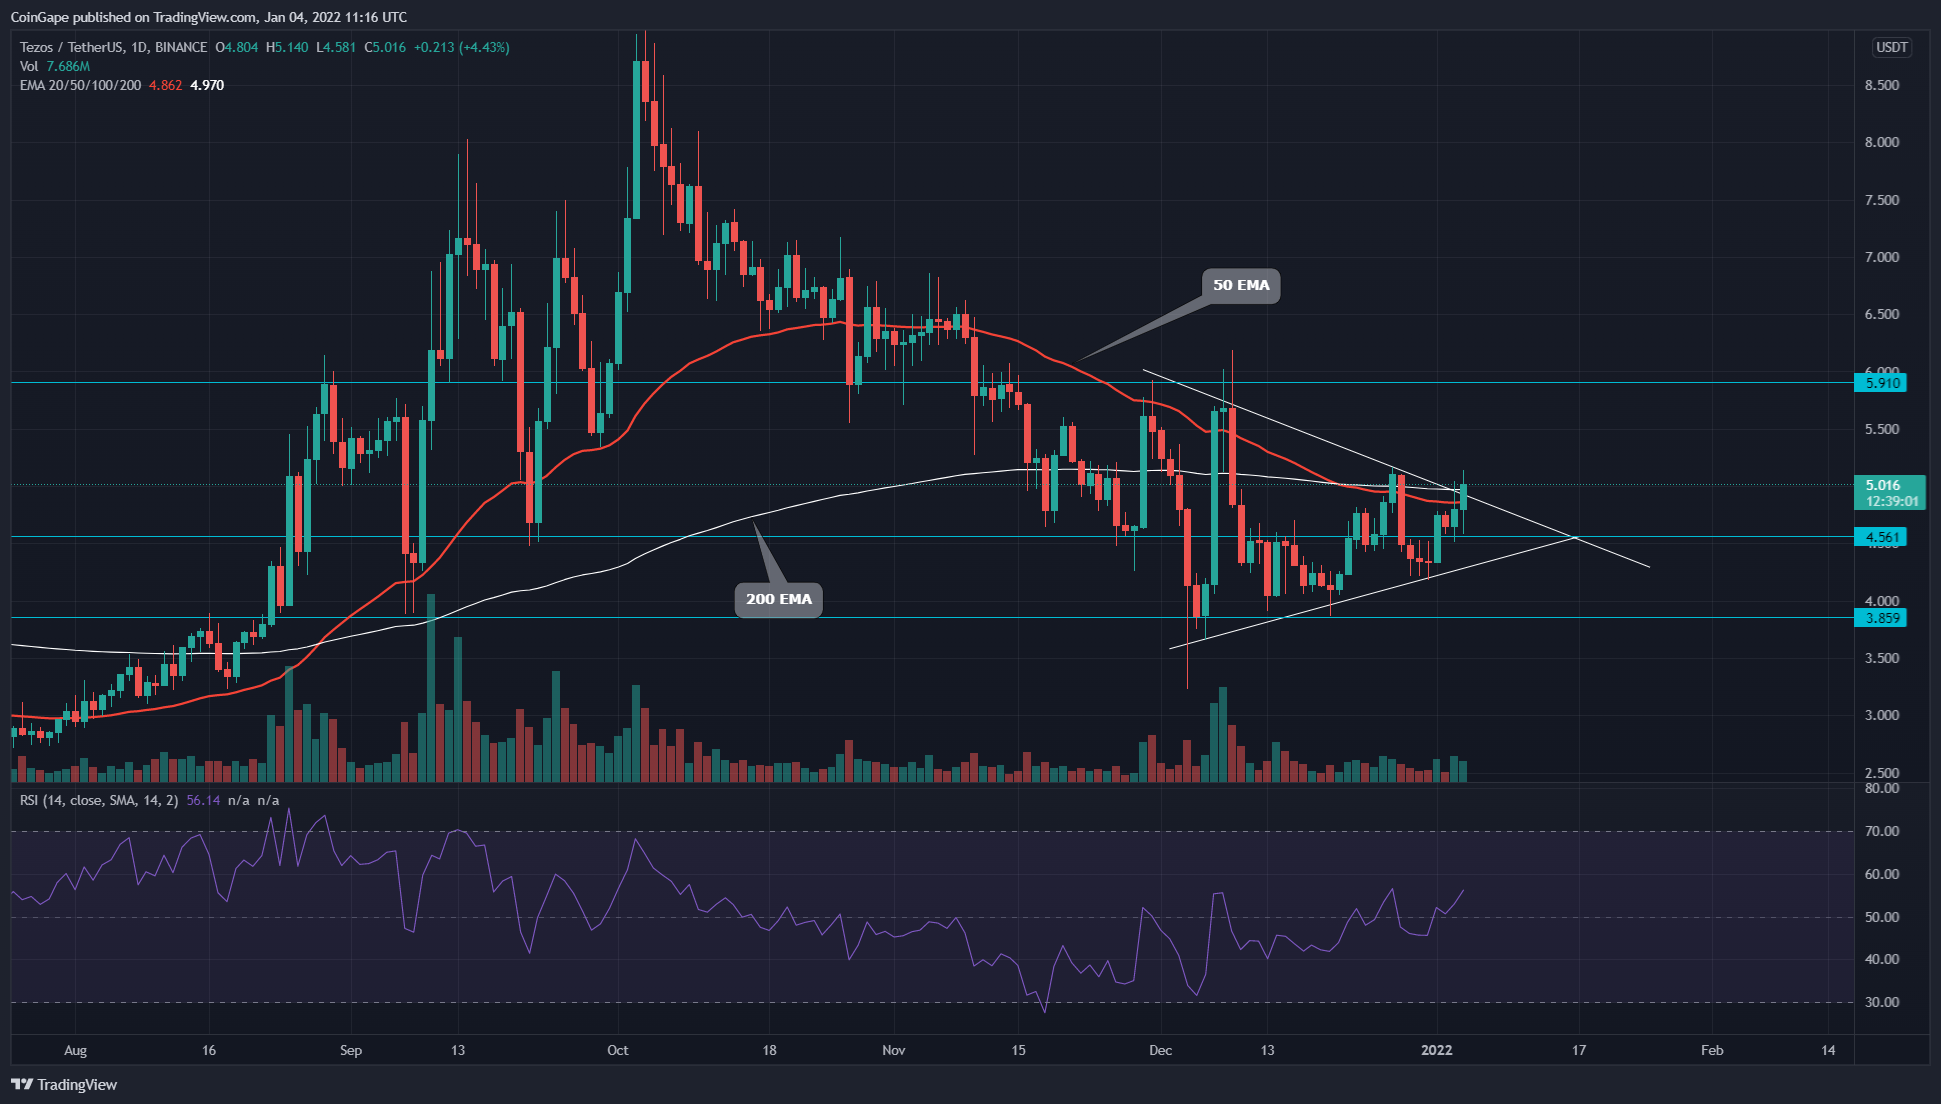 Tezos Price Analysis: Symmetrical Triangle Could Lead to 20% Growth in XTZ Coin